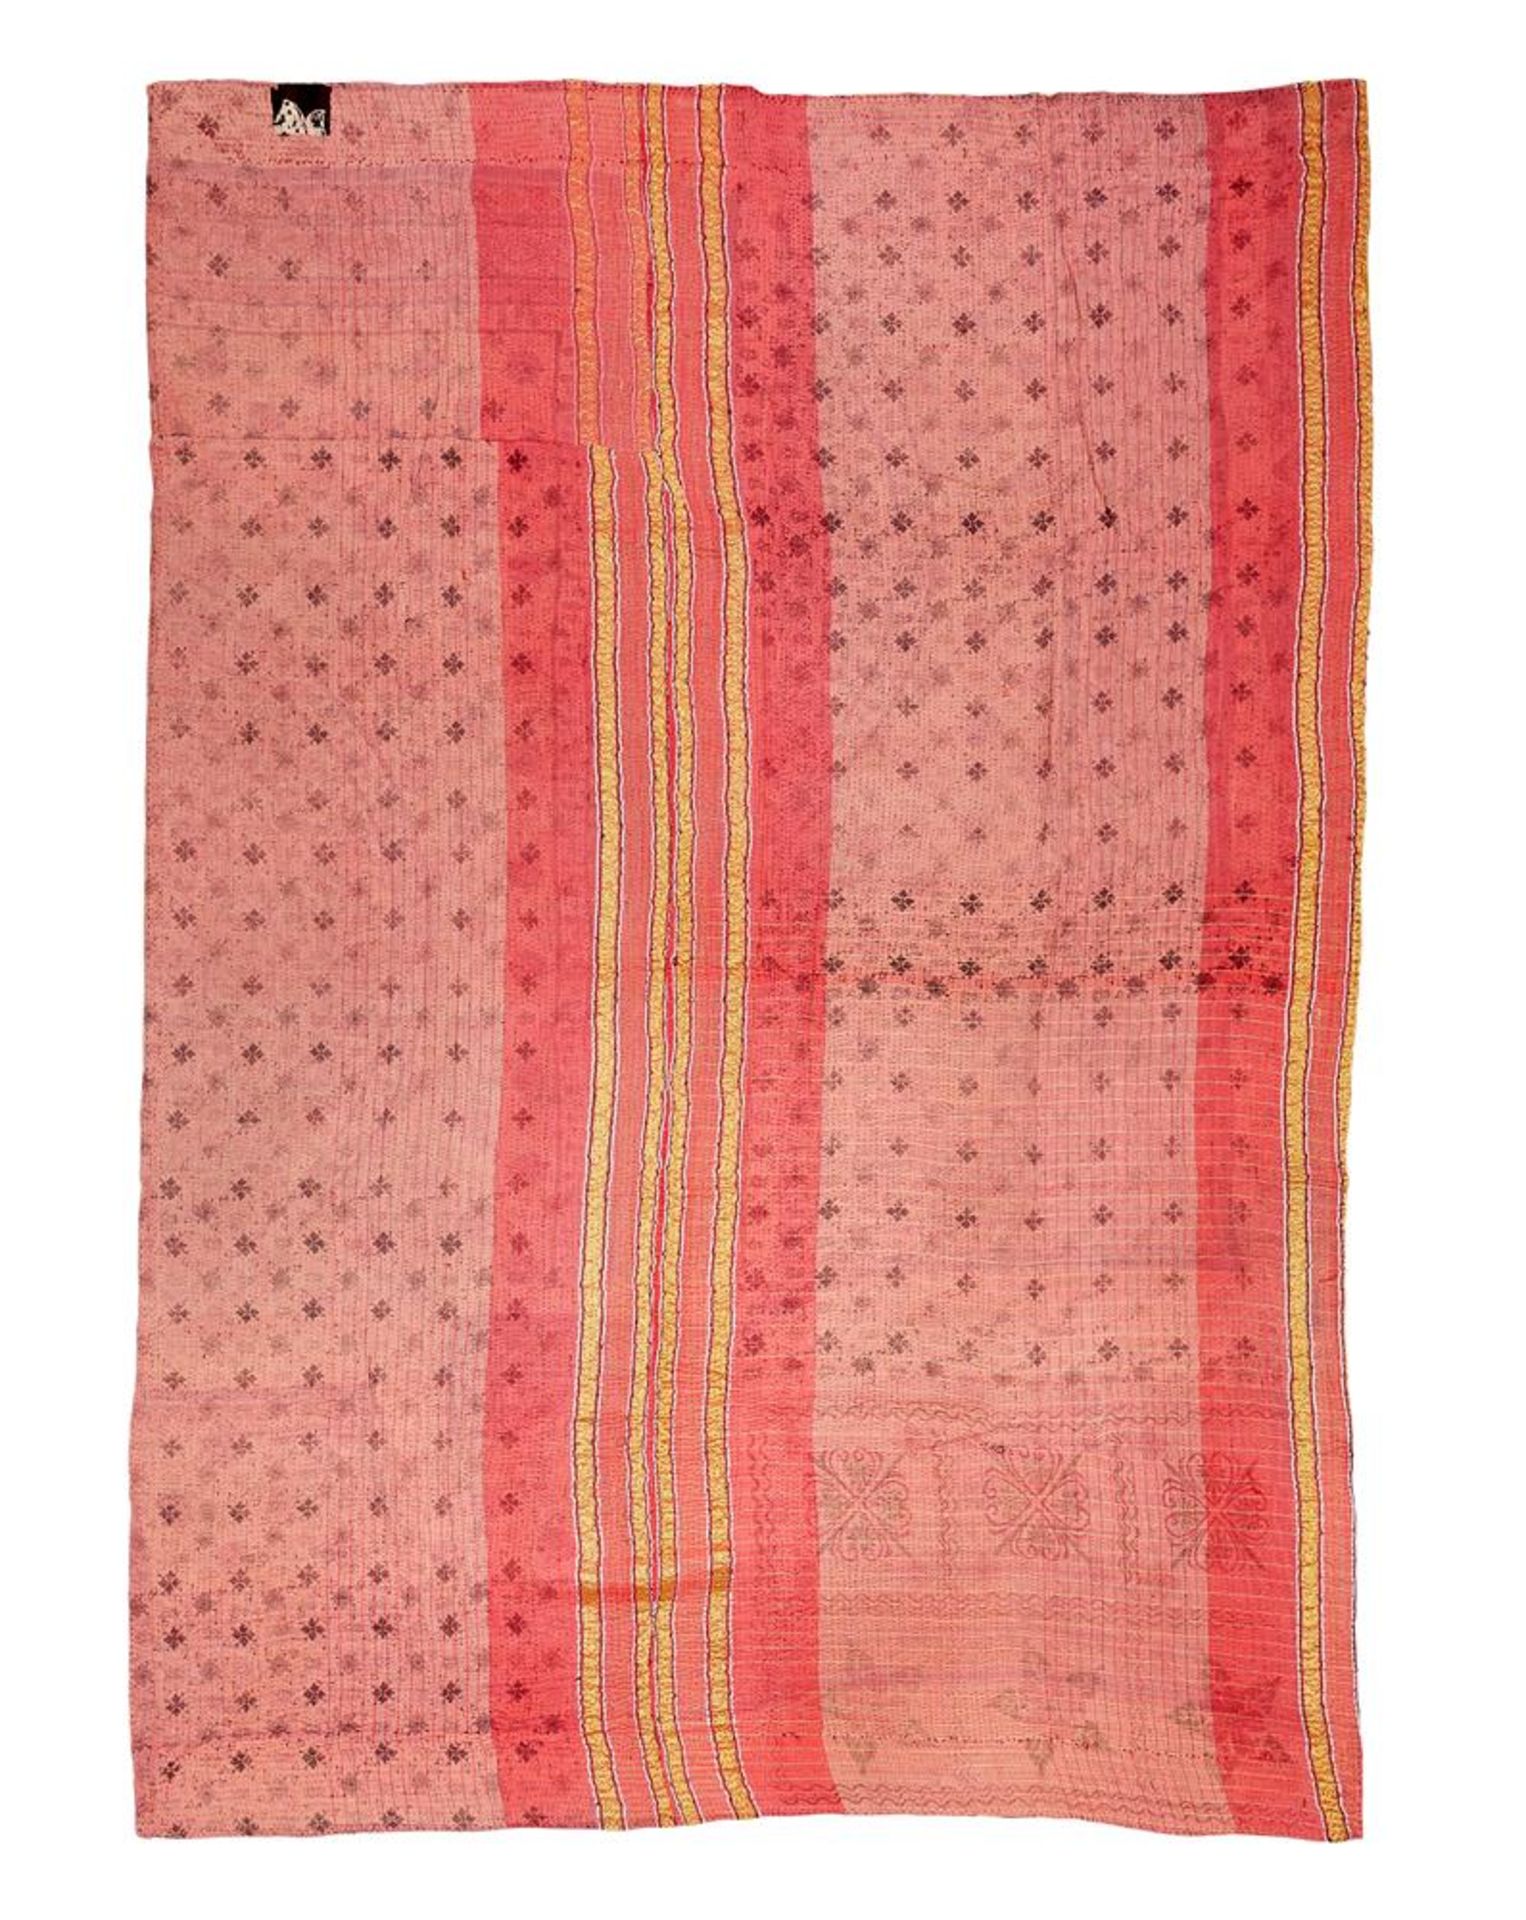 A KANTHA QUILT INDIAN - Image 2 of 2